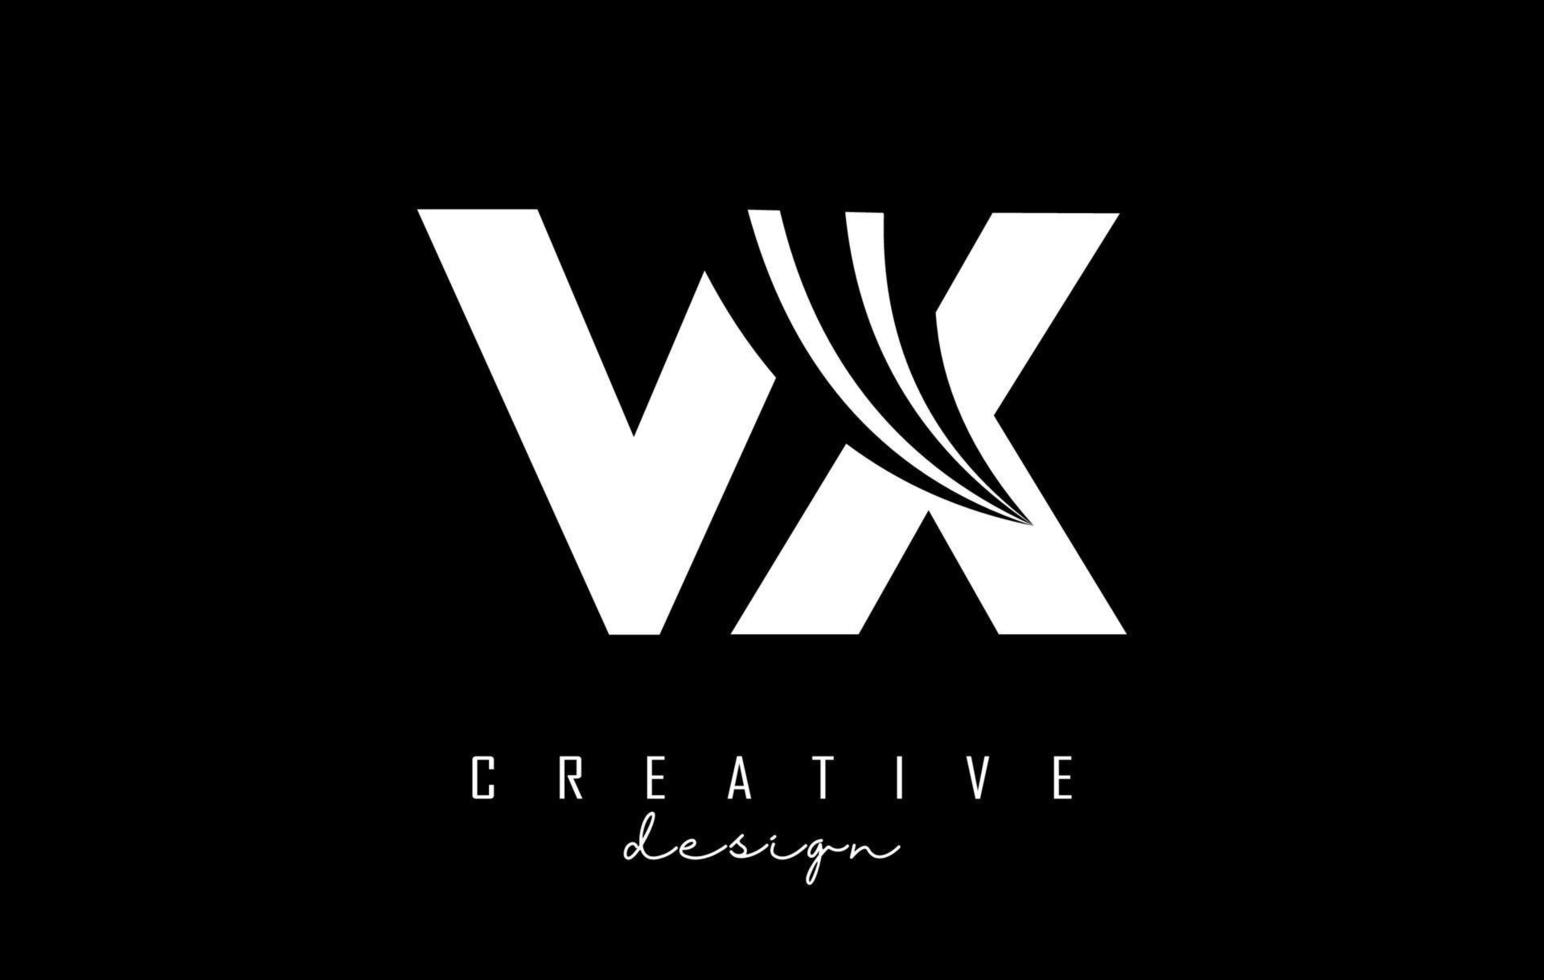 Creative white letters VX v x logo with leading lines and road concept design. Letters with geometric design. vector